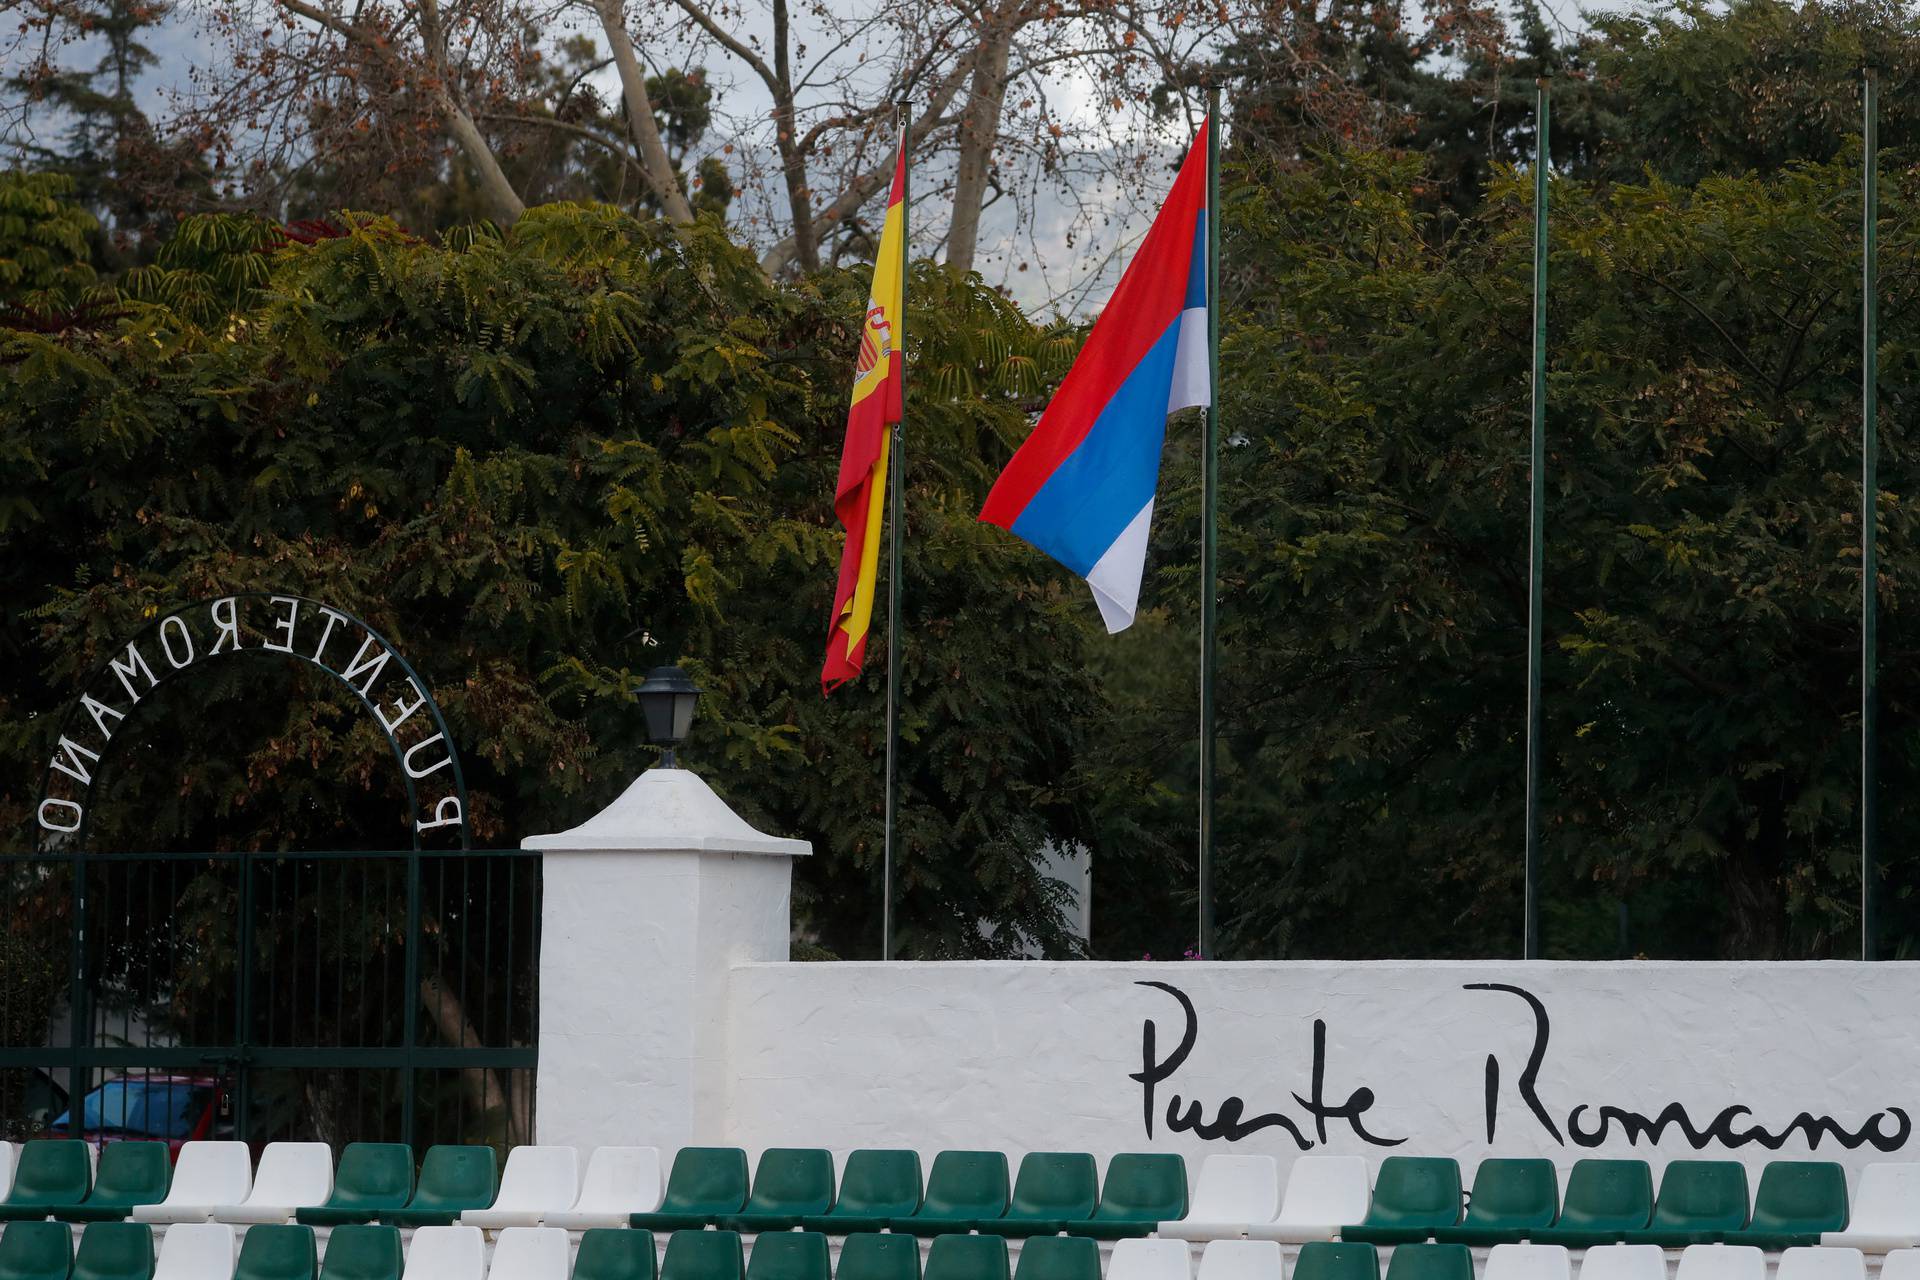 Flags of Serbia and Spain are seen at the Puente Romano Tennis Club in Marbella